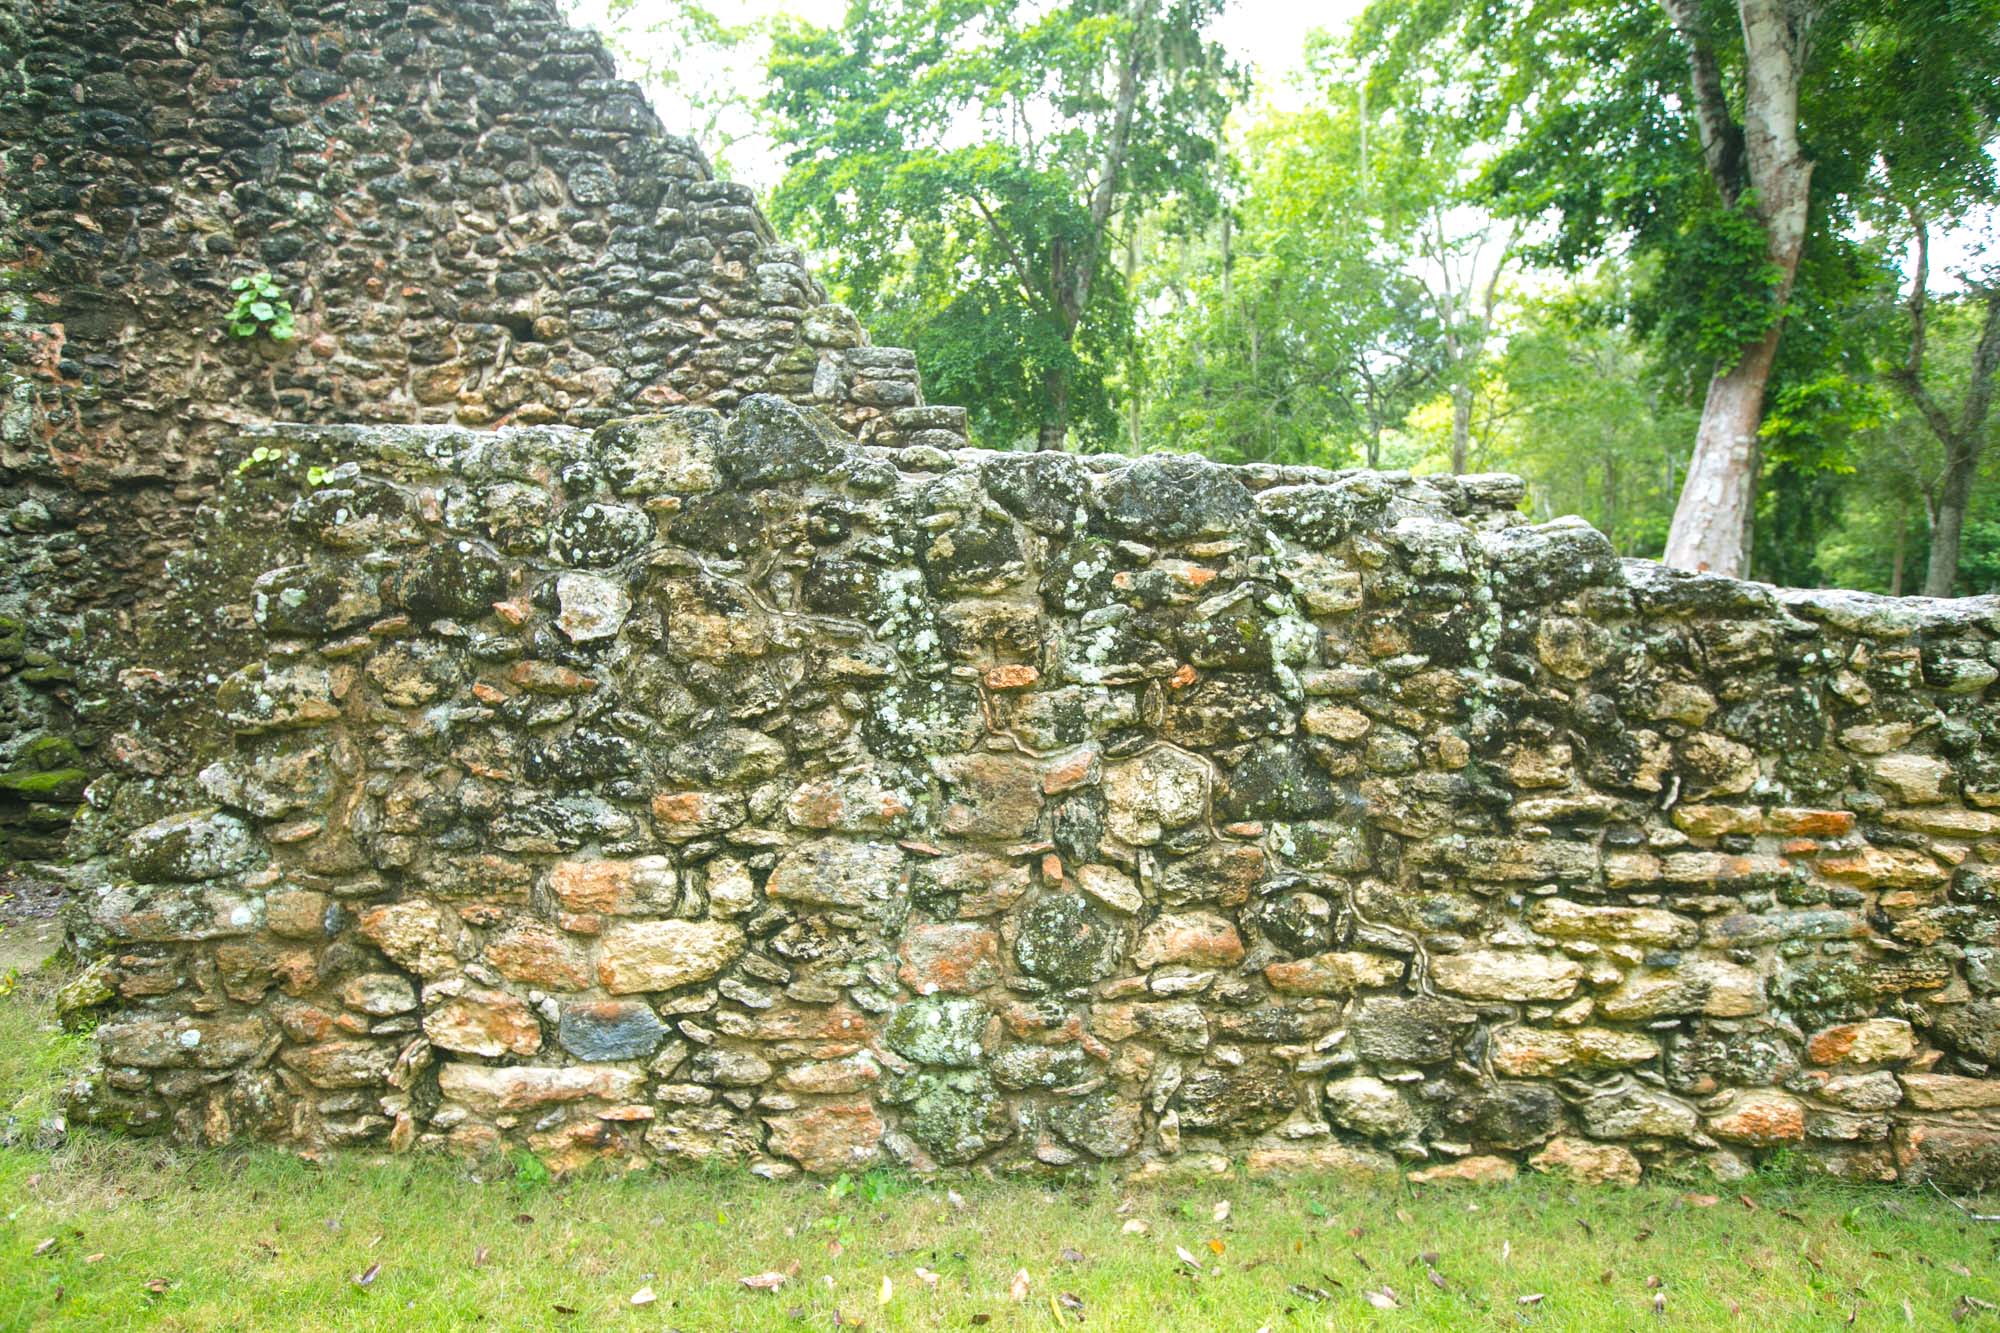 Stone masonry at the Mayan ruins of Dzibanche in Mexico